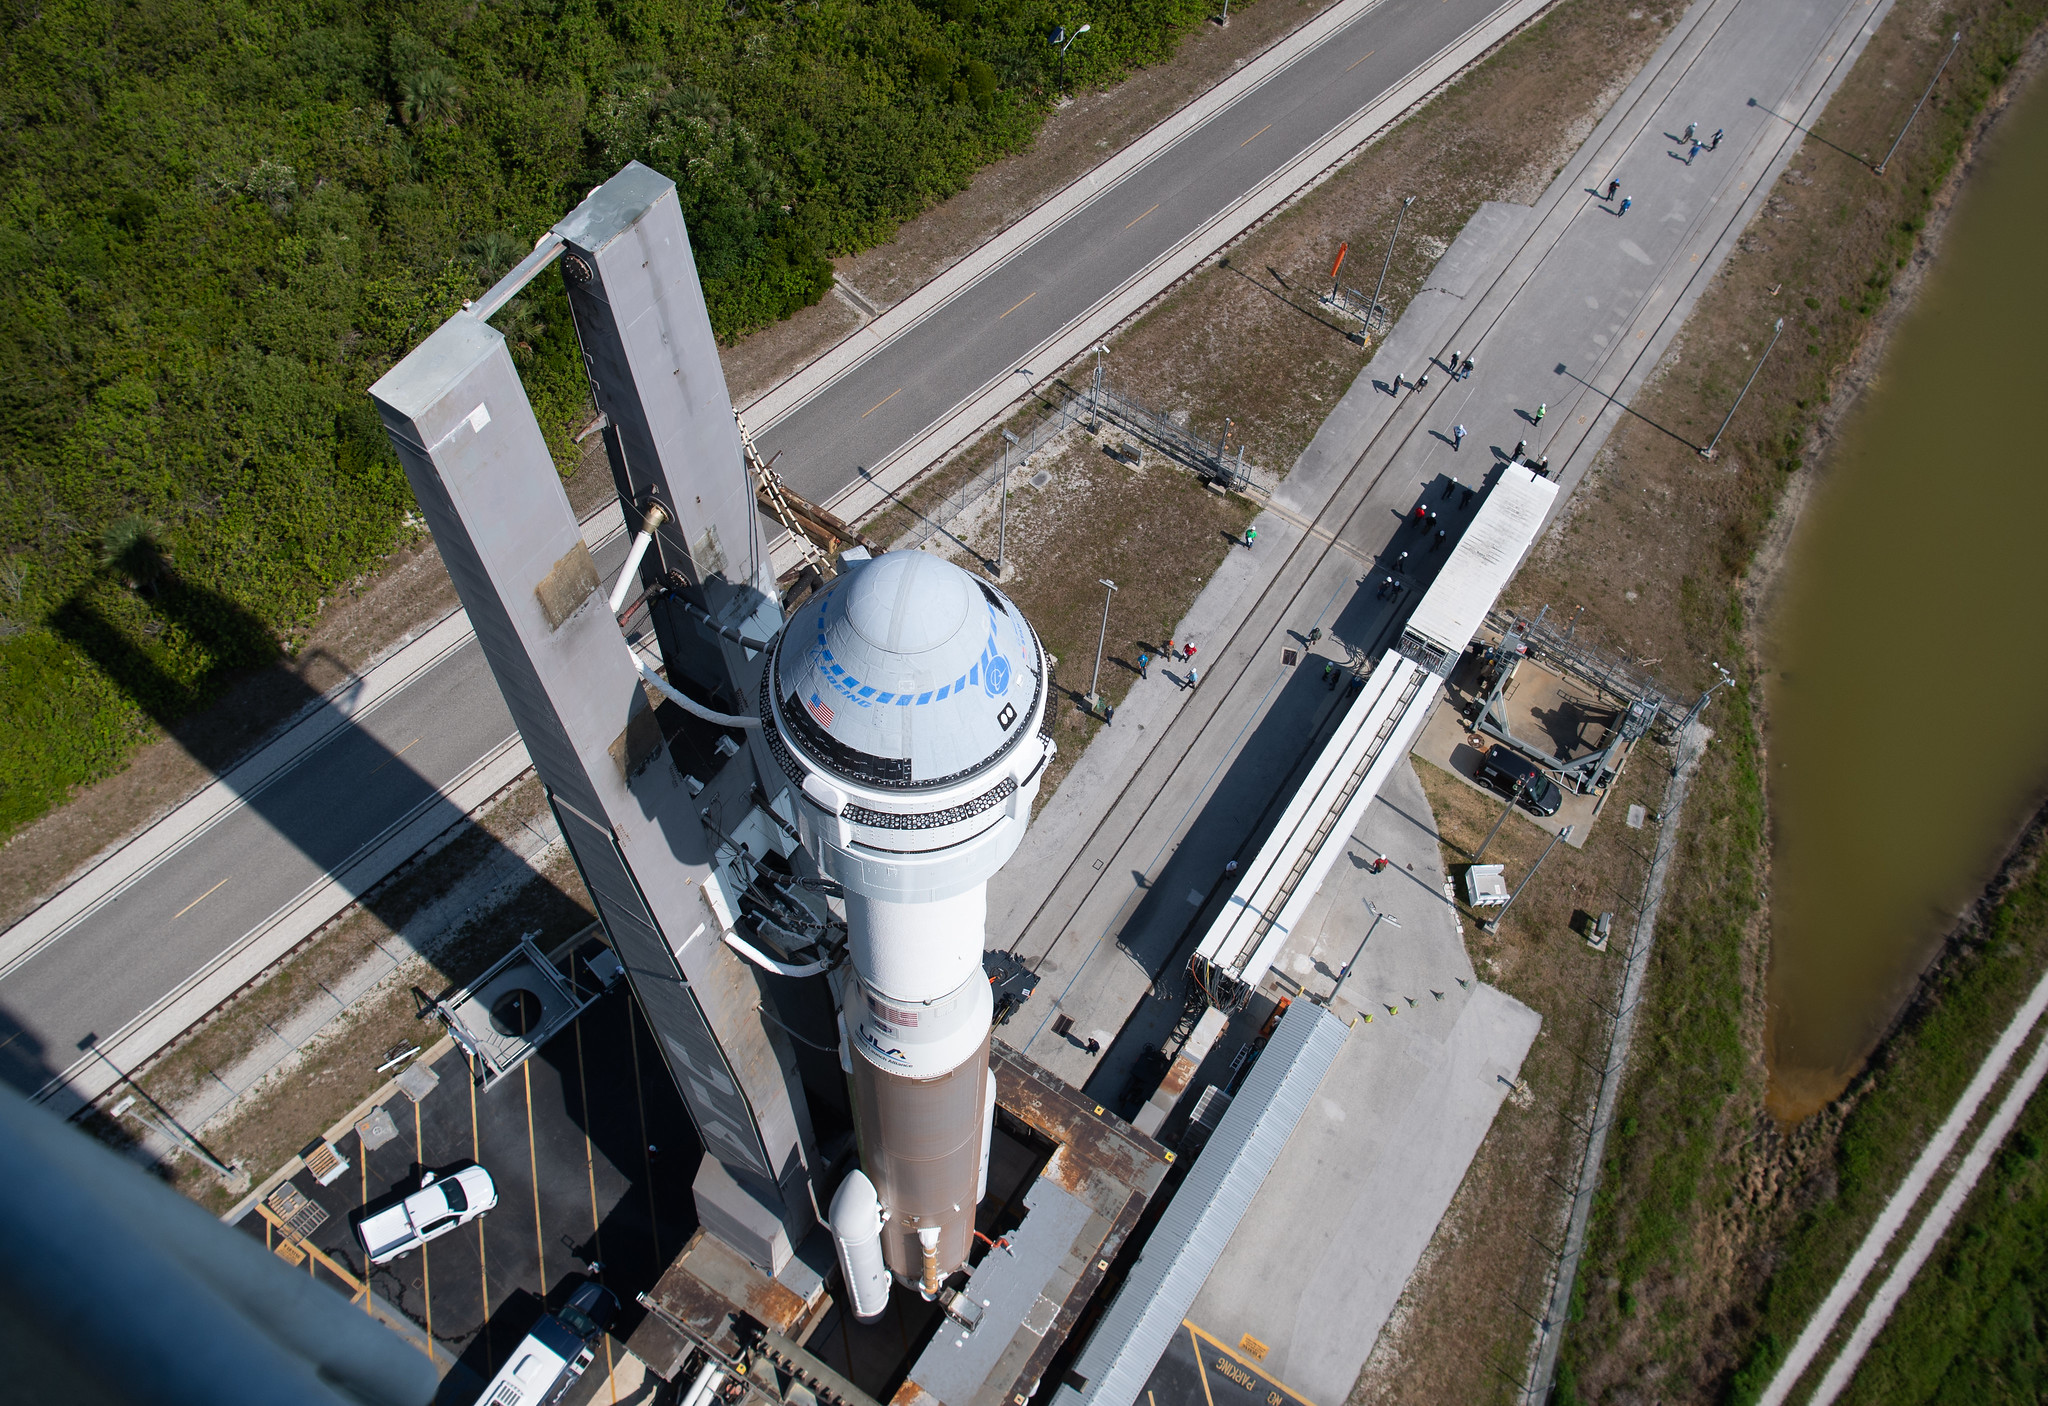 Boeing's Starliner OFT-2 spacecraft and its Atlas V rocket arrive at the launch pad on May 18, 2022.